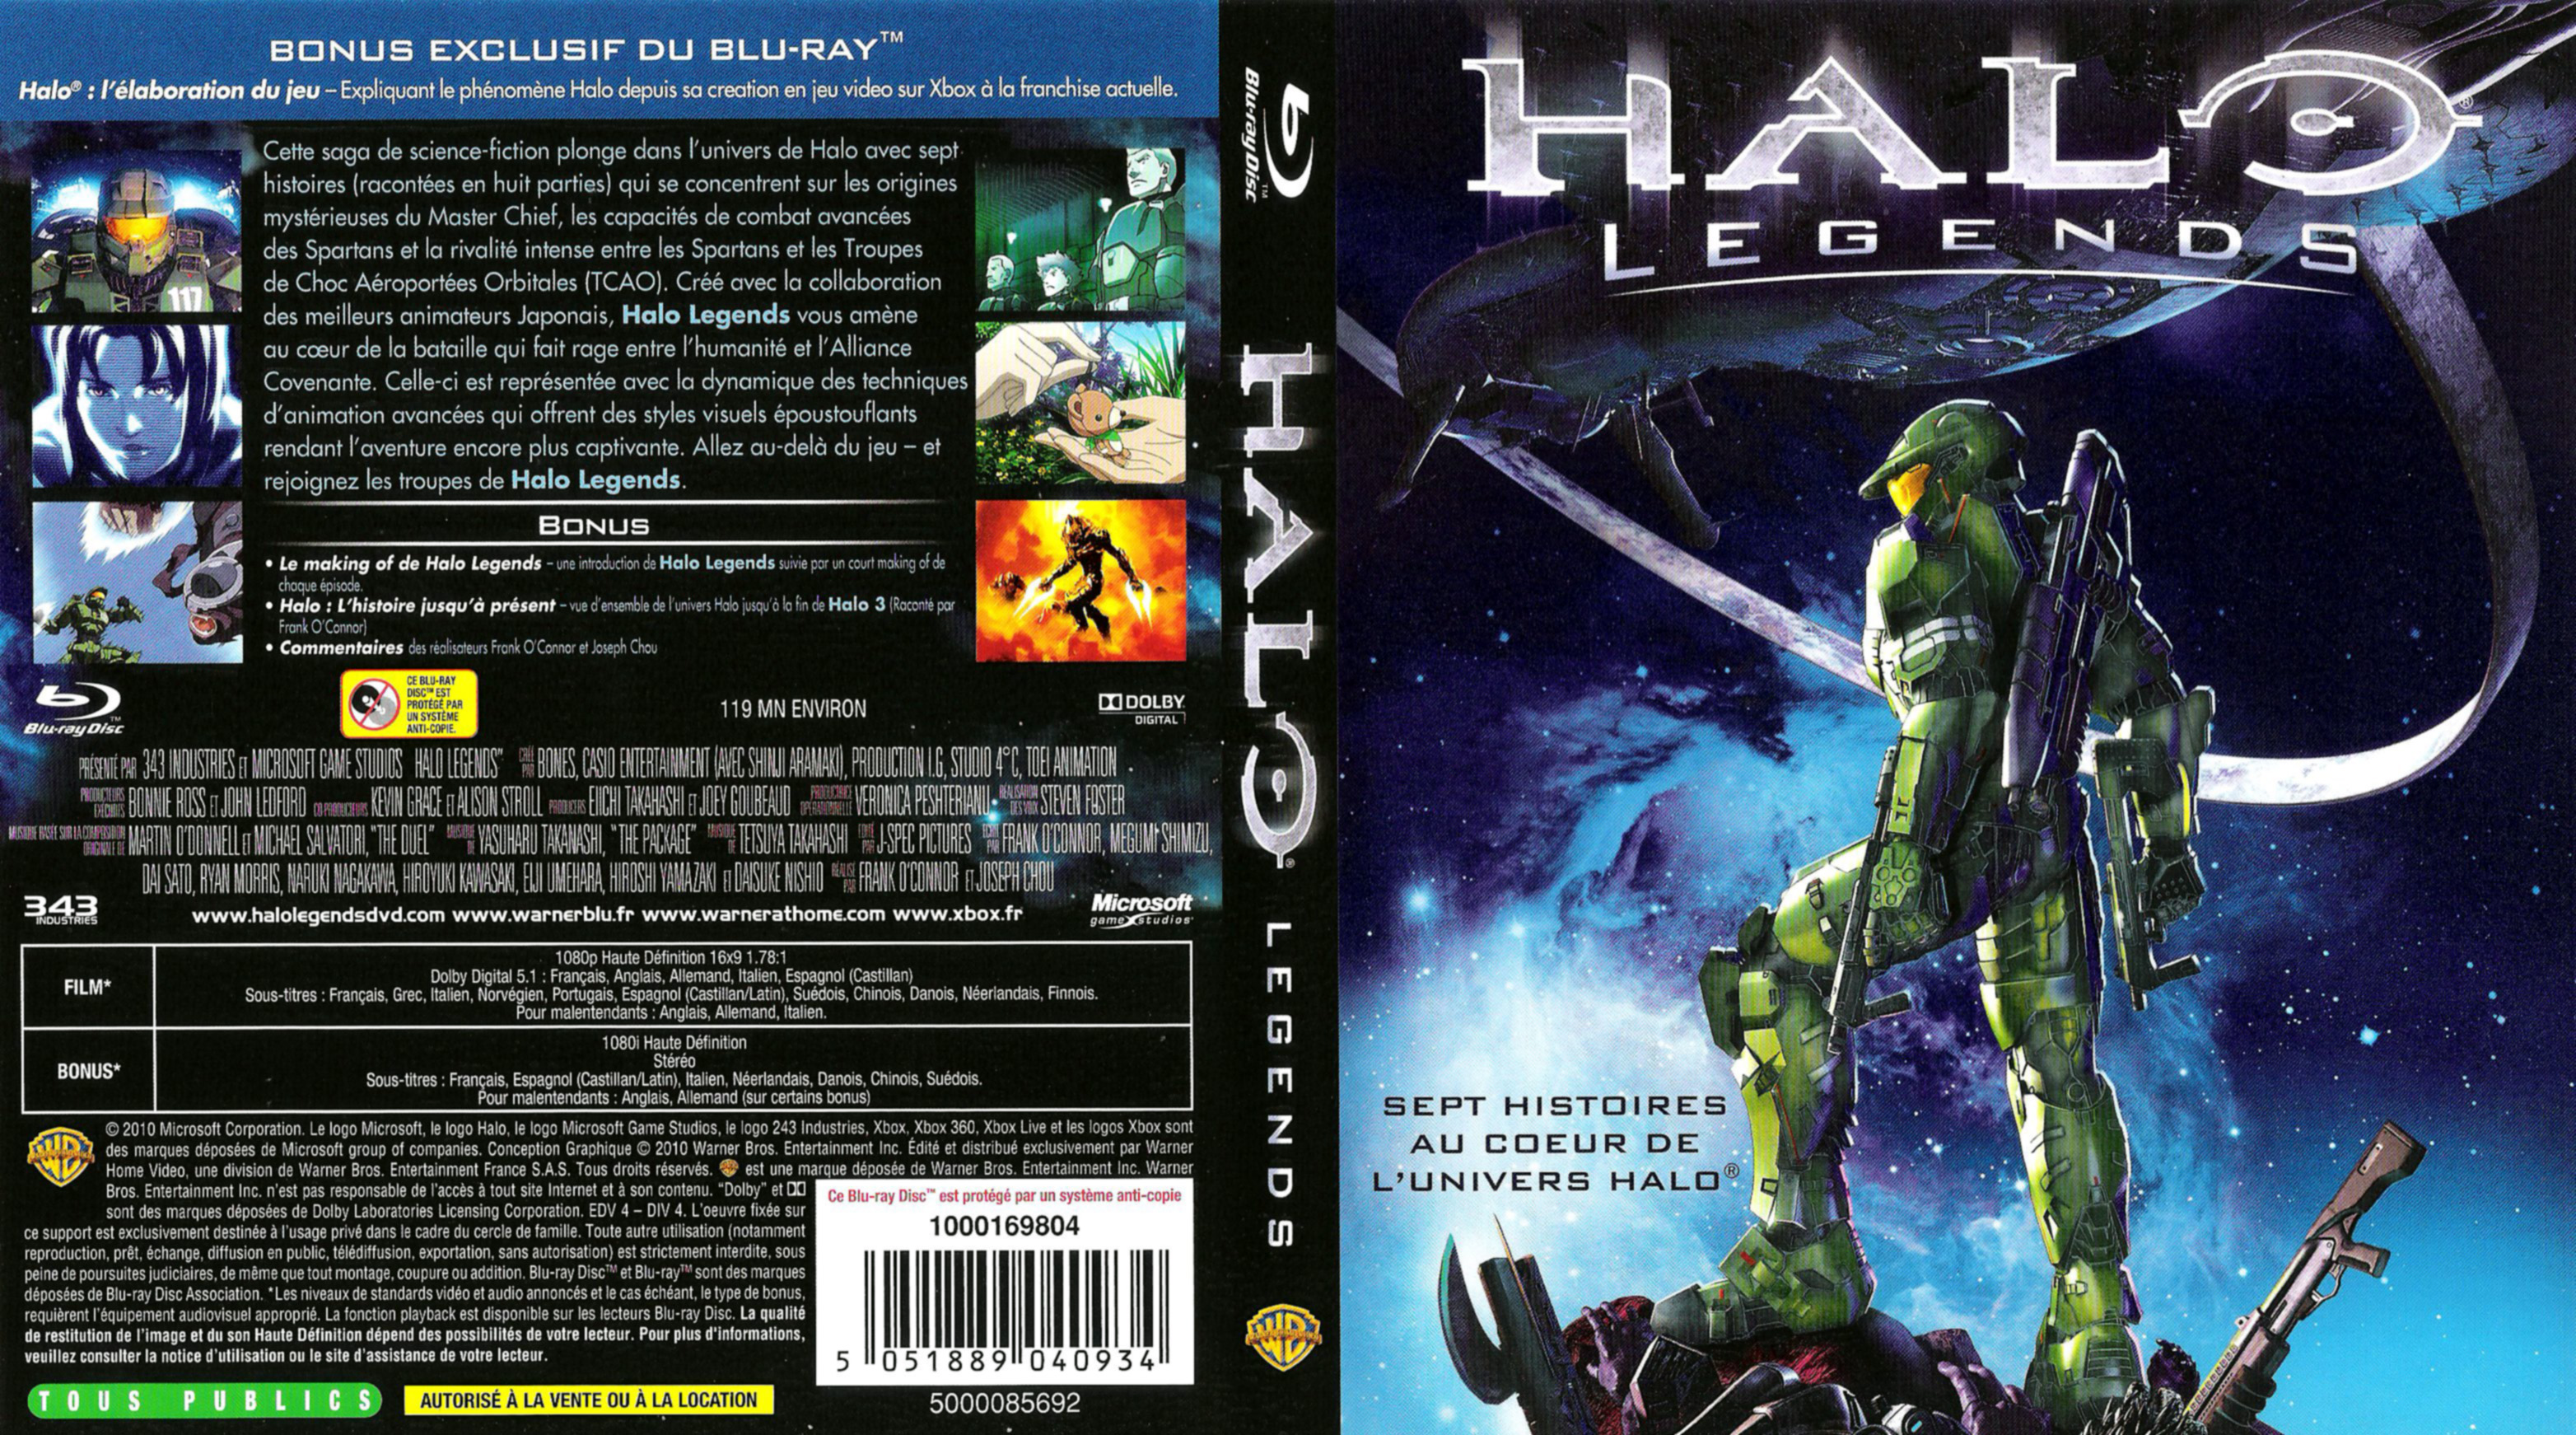 Jaquette DVD Halo legends (BLU-RAY)